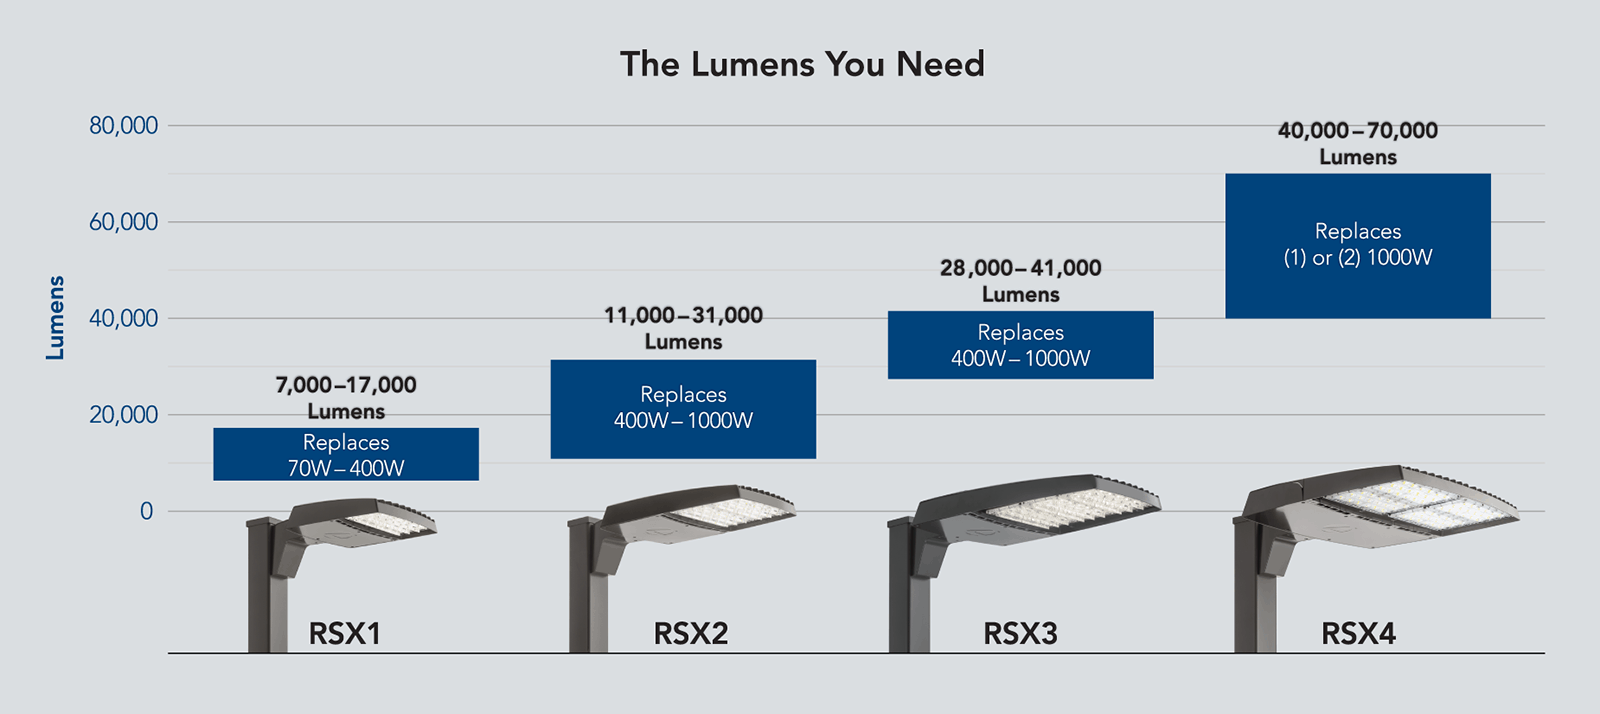 Lithonia-RSX-the-lumens-you-need-chart1